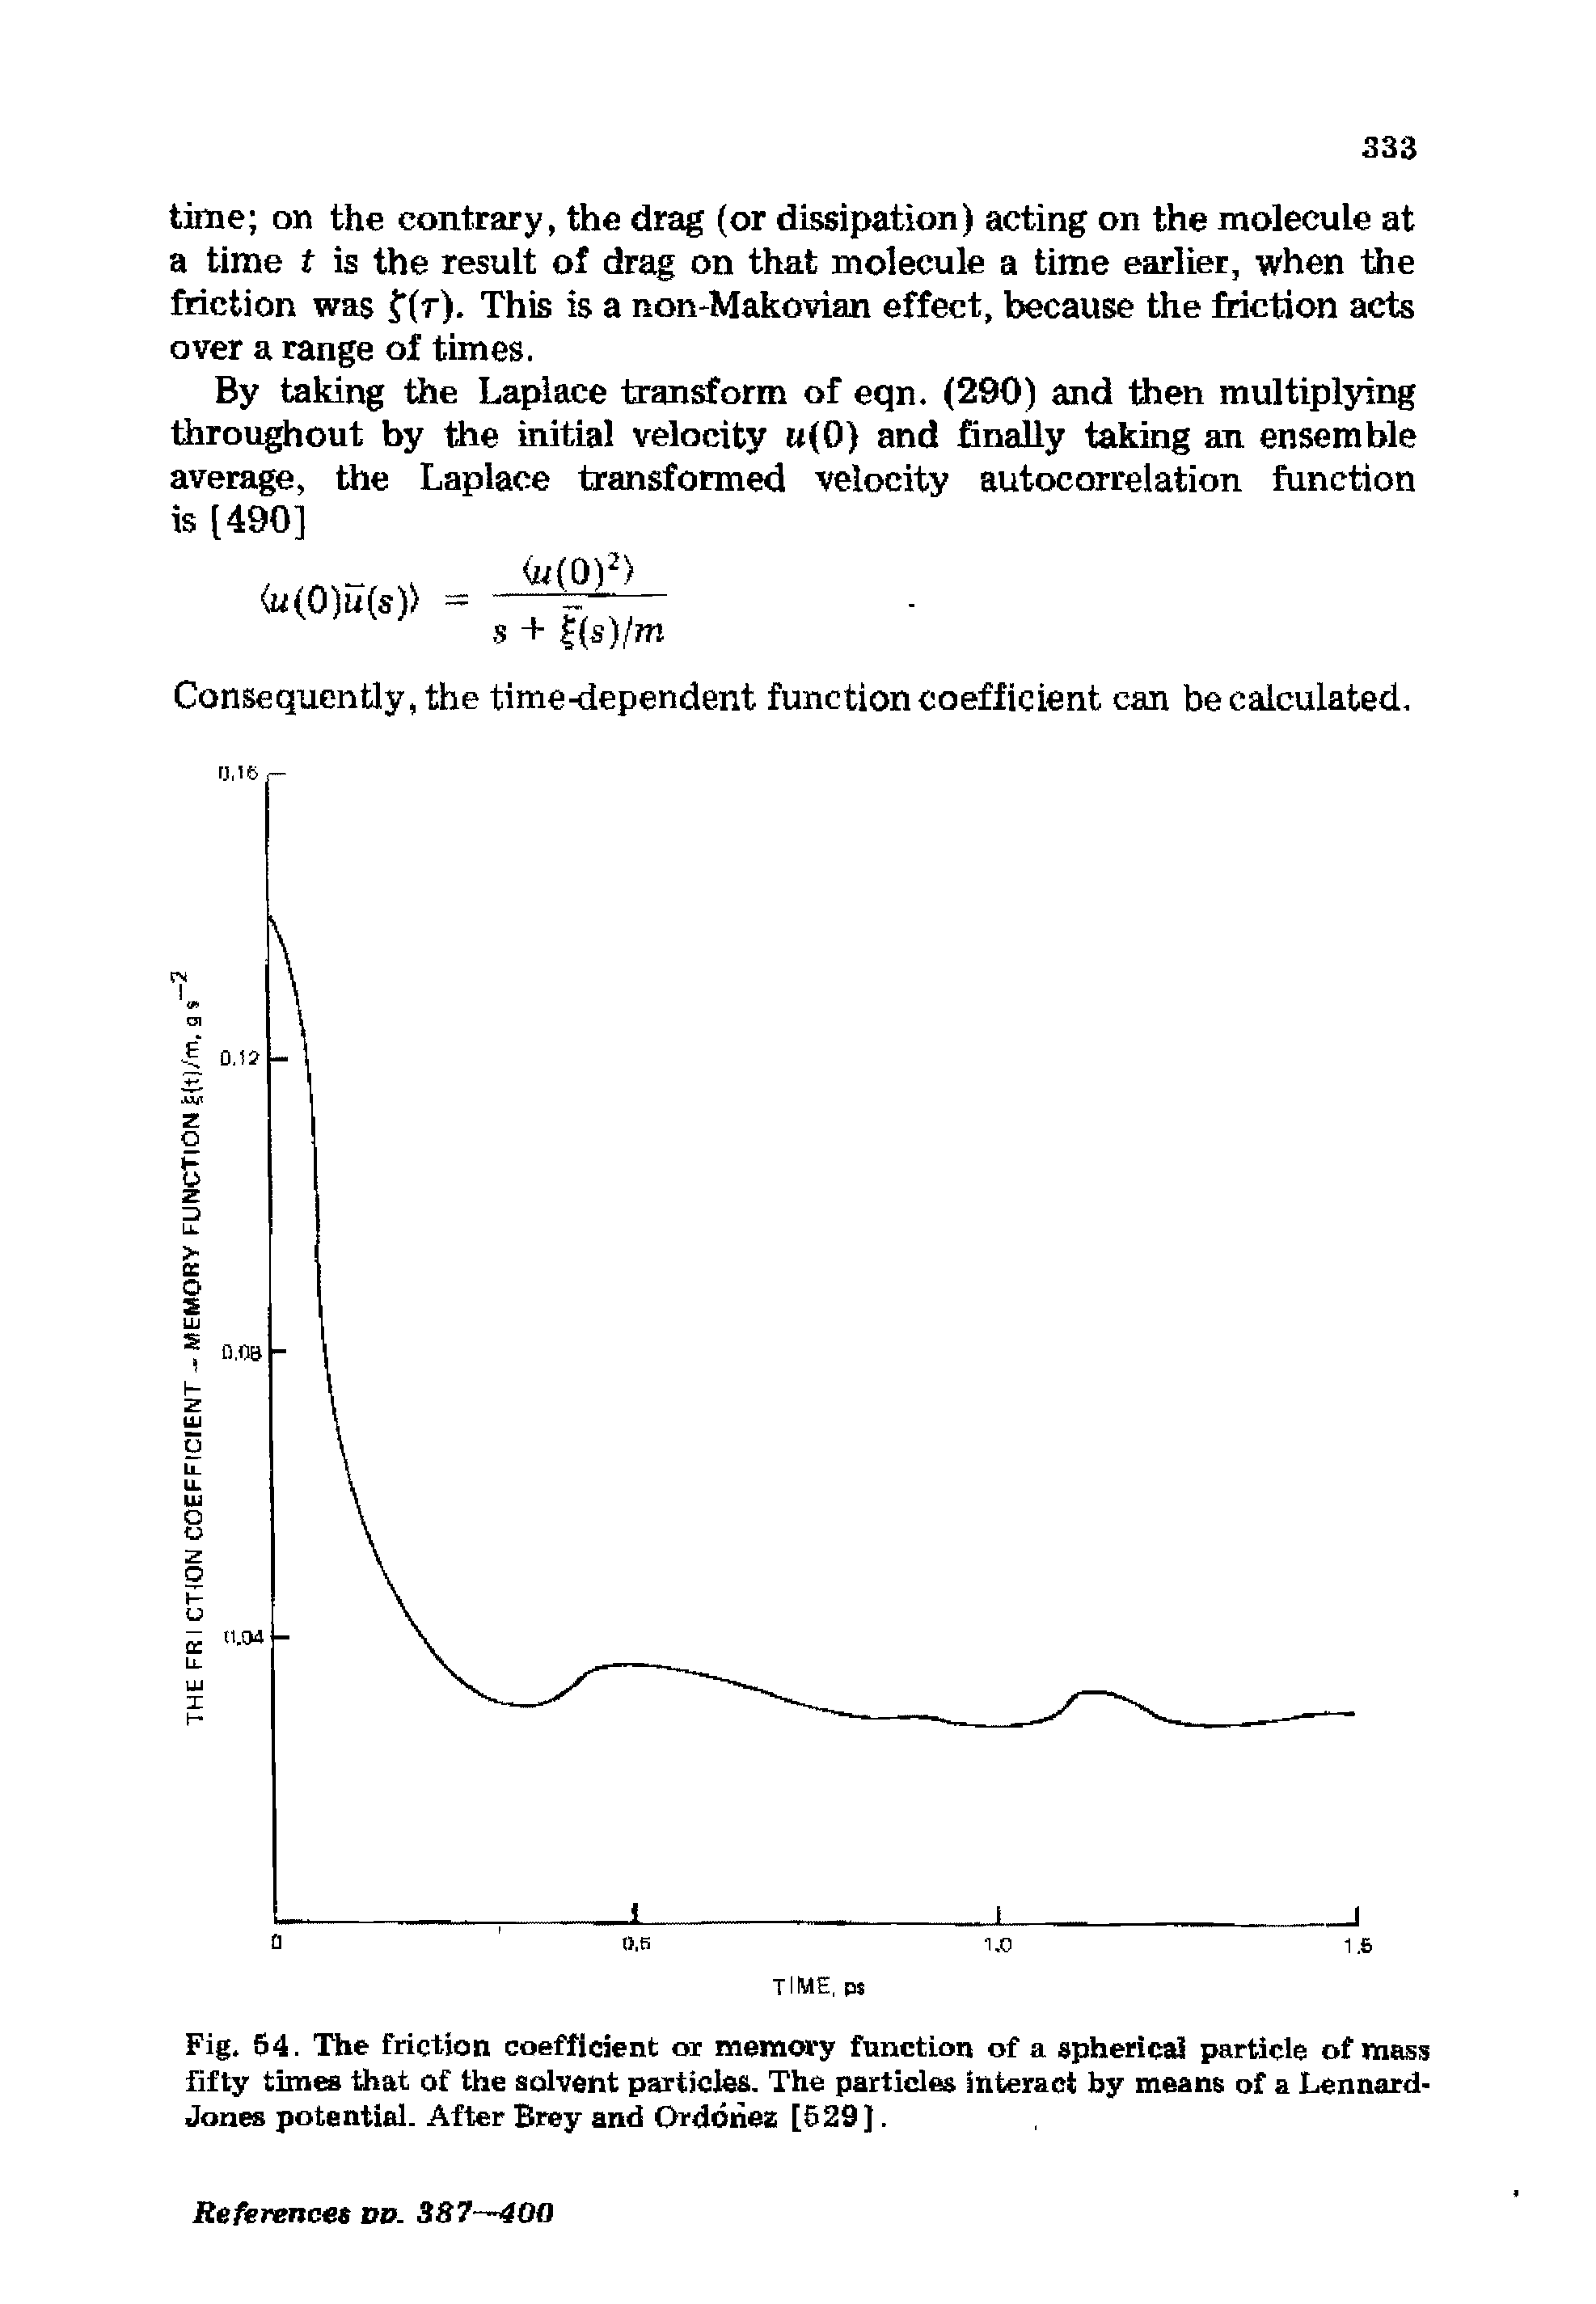 Fig. 54. The friction coefficient or memory function of a spherical particle of mass fifty times that of the solvent particles. The particles interact by means of a Lennard-Jones potential. After Brey and Ordonez [529 J.